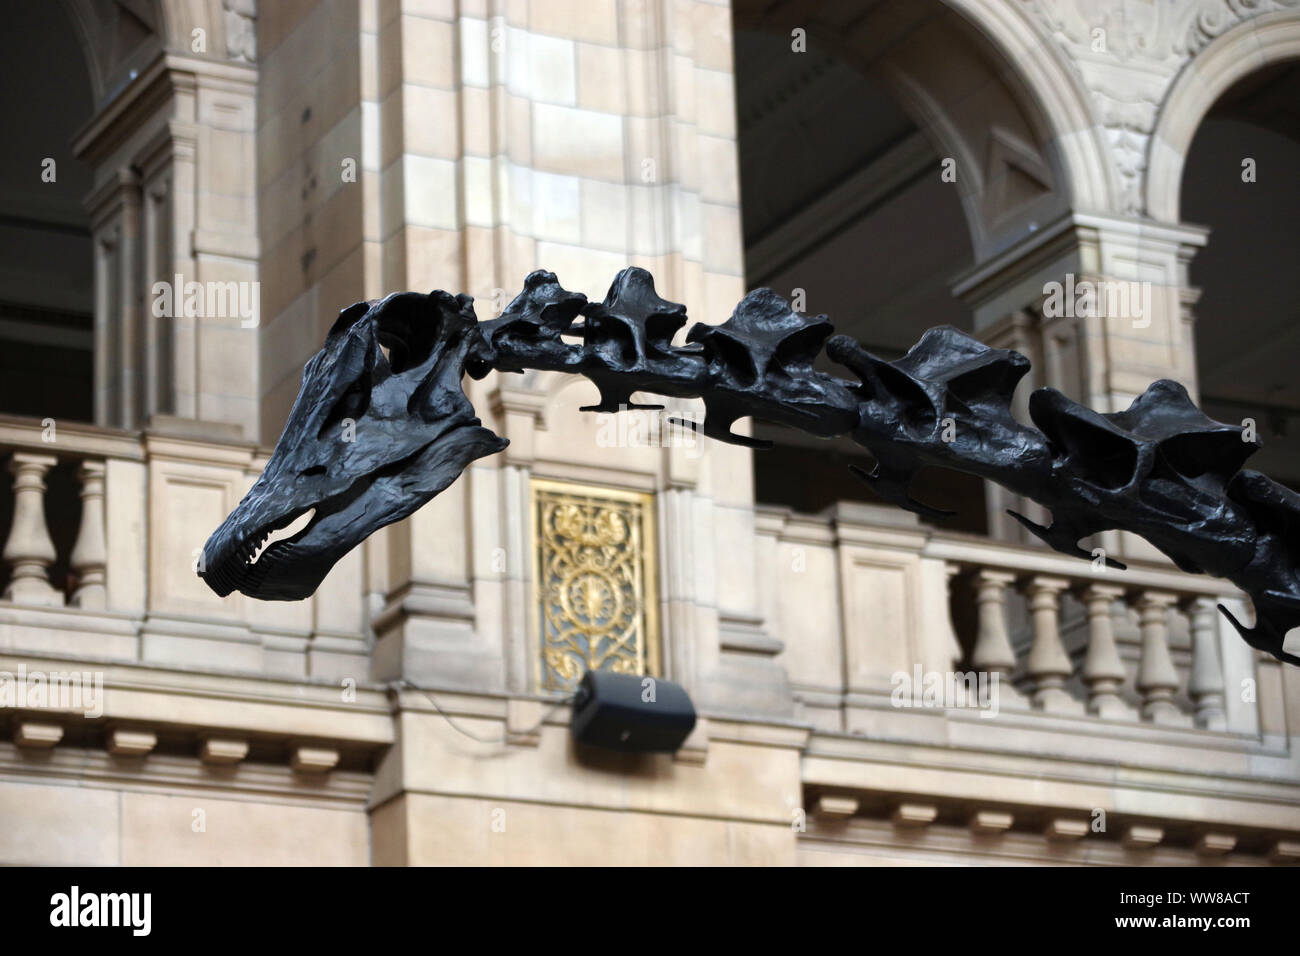 Dippy on display at the Kelvingrove Art Gallery and Museum. The Natural History Museum's iconic Diplodocus cast Stock Photo